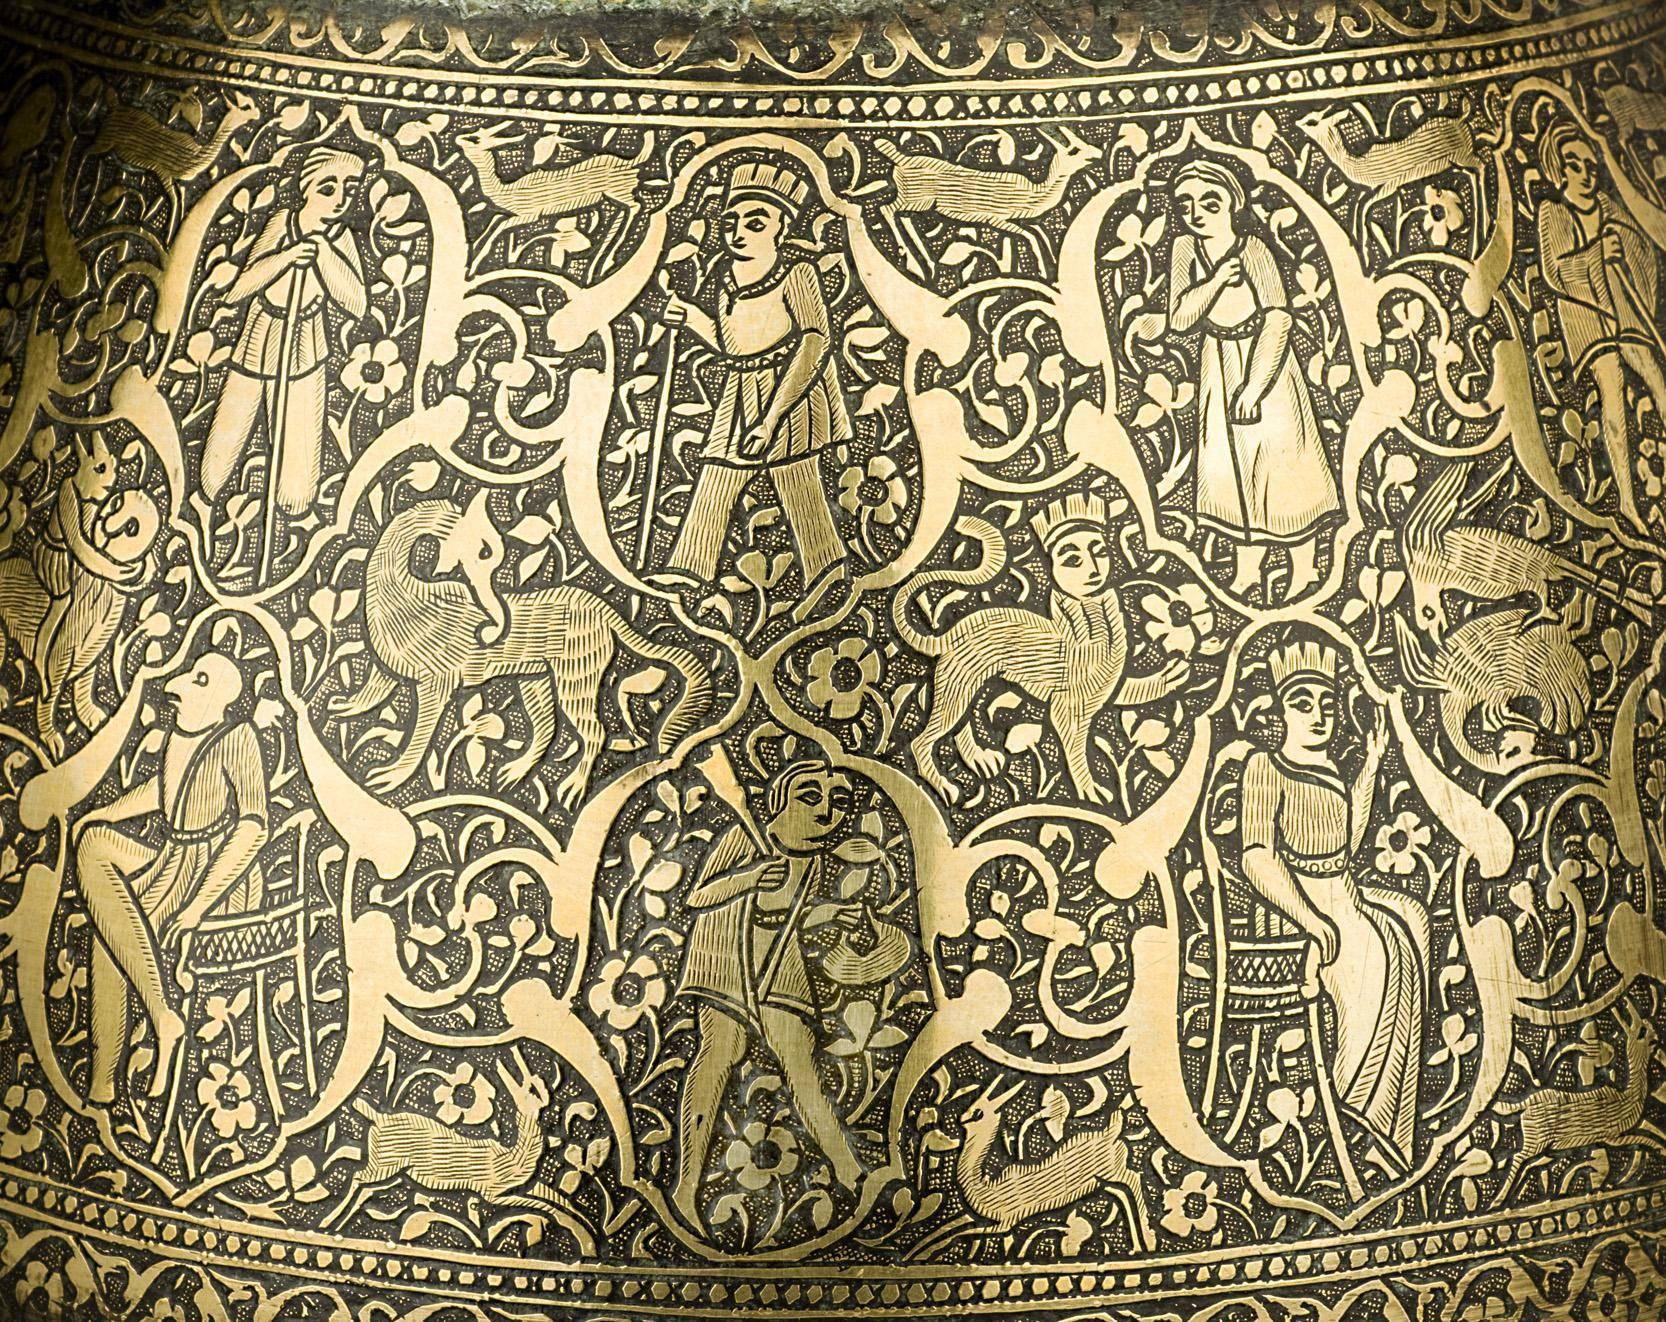 Of curving conical form, with slender neck and flaring mouth, three panels of exterior decoration separated by three ribs. The main body panel densely engraved with acrobats and dancers, gazelles, birds amidst a backdrop of interlacing floral vines.